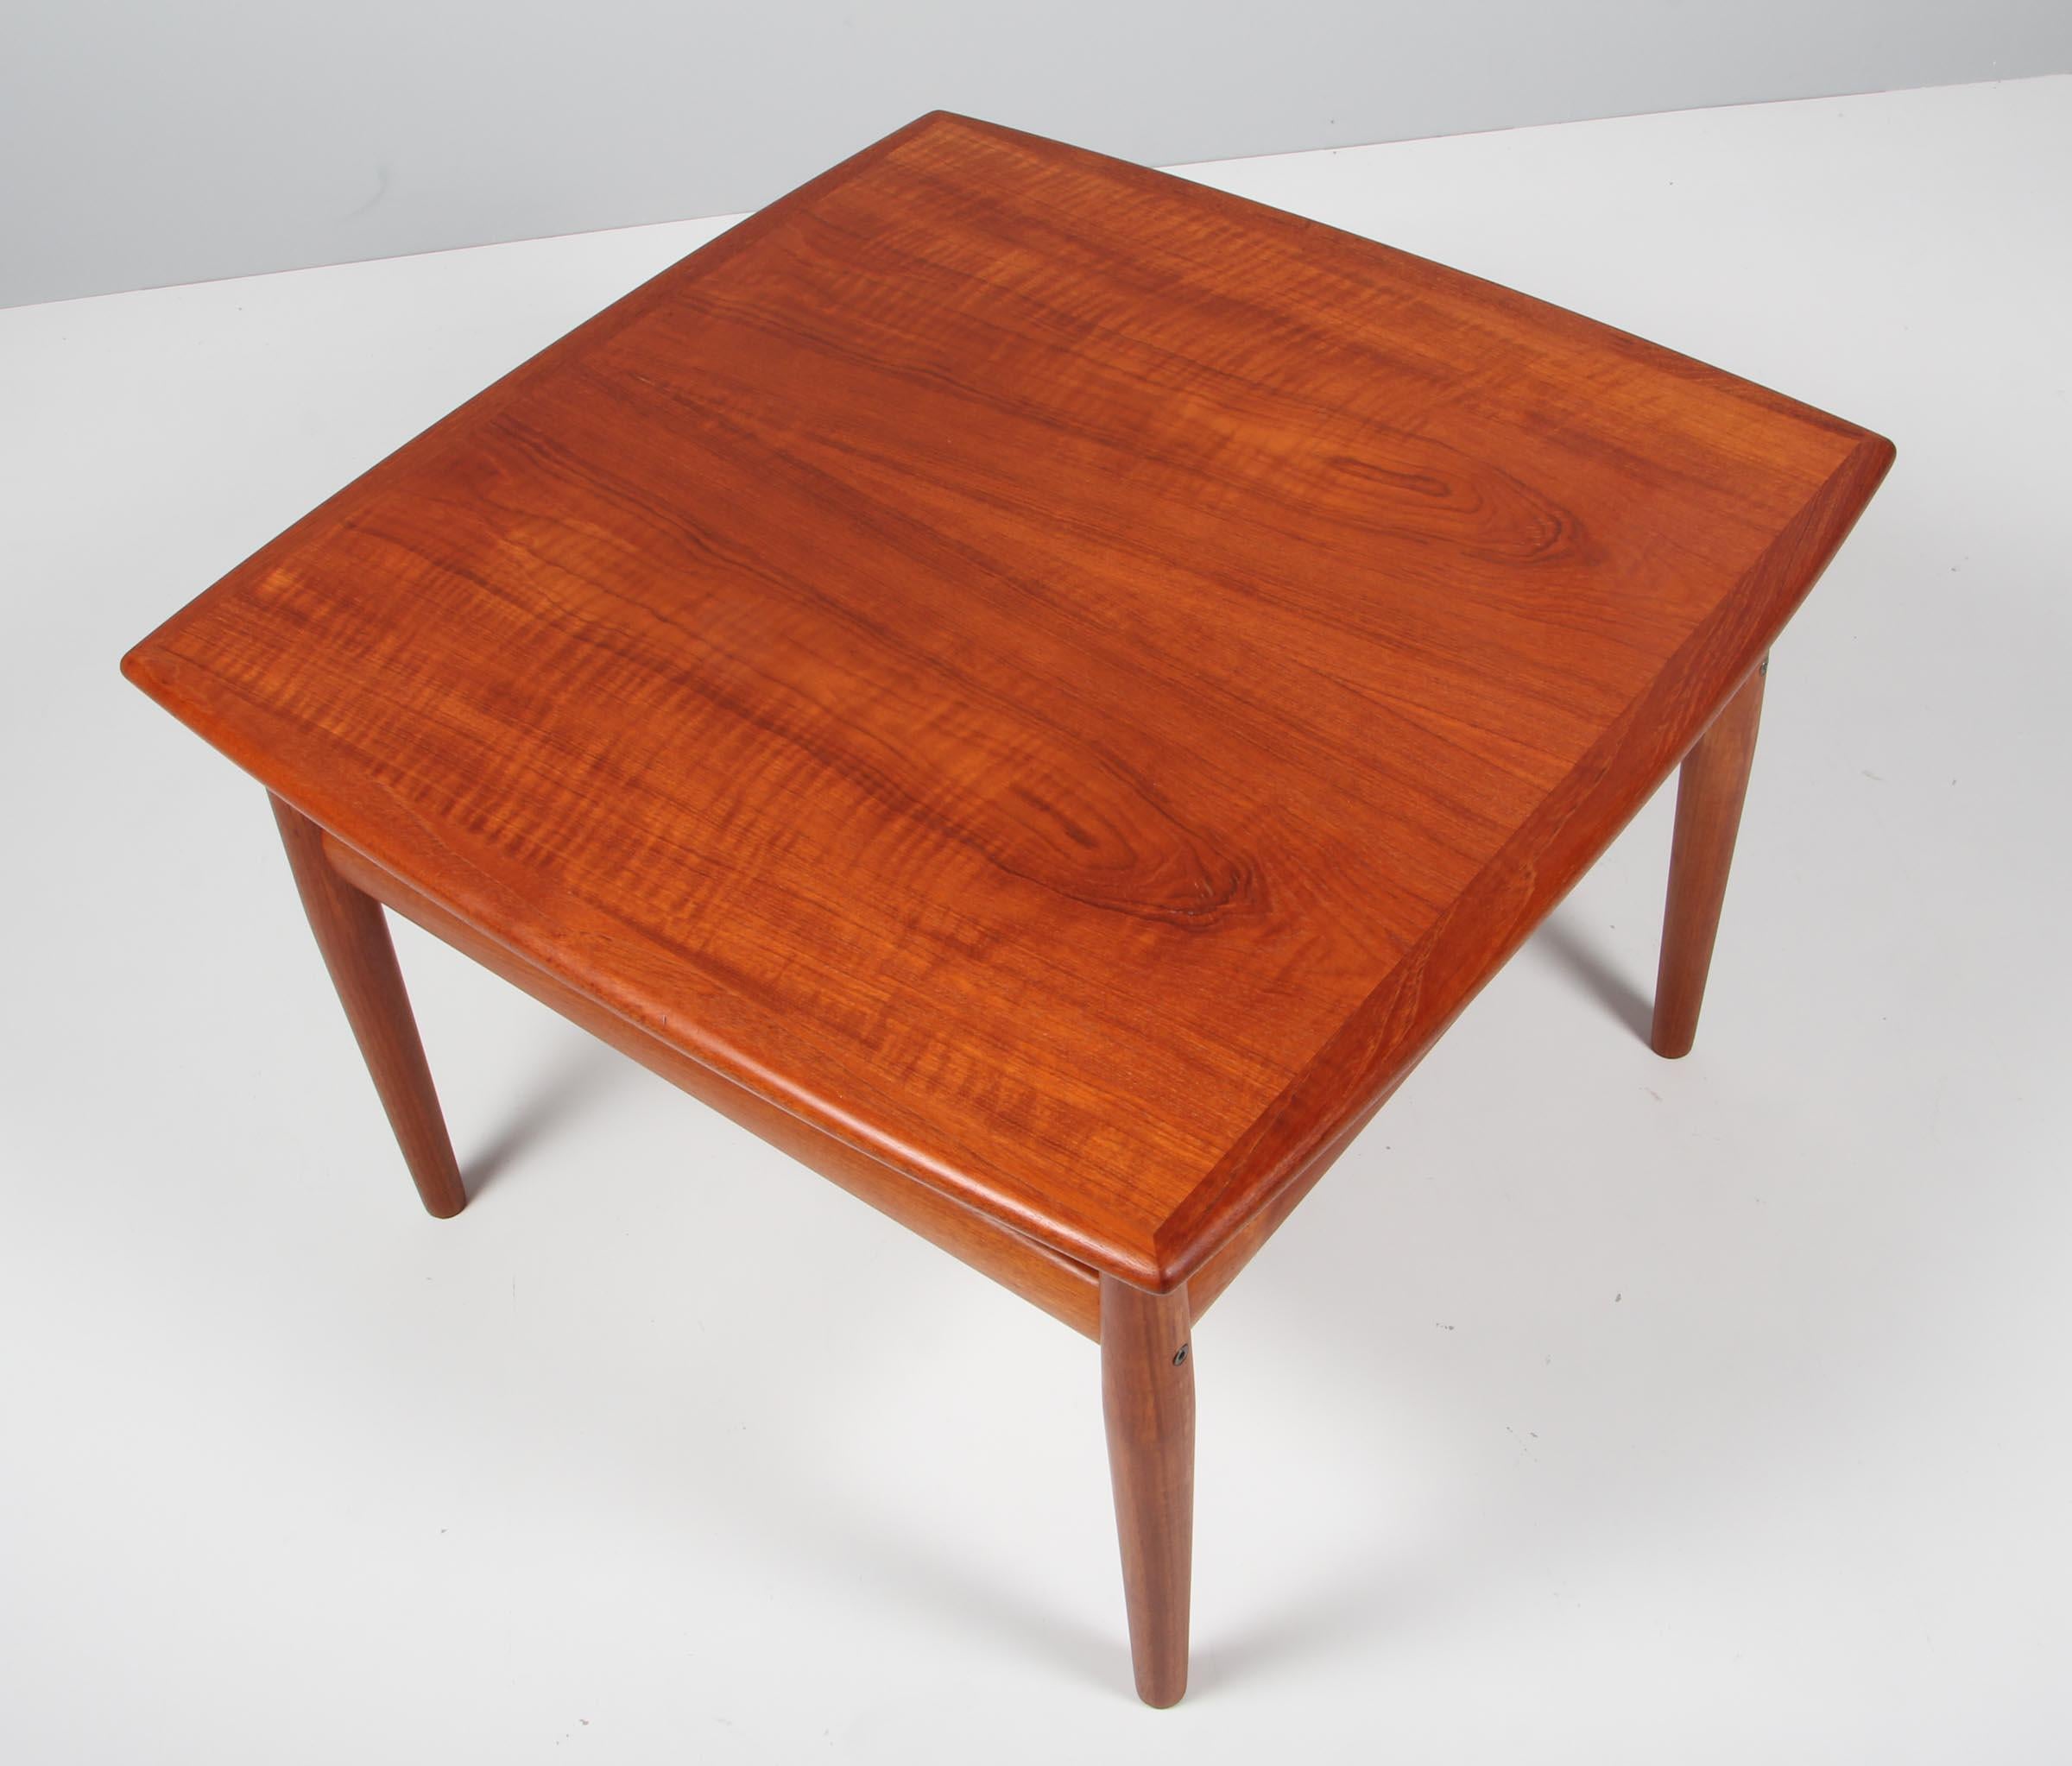 Grete Jalk sofa table. Top of veenered teak, base of solid teak.

Made by France & Son in the 1960s.